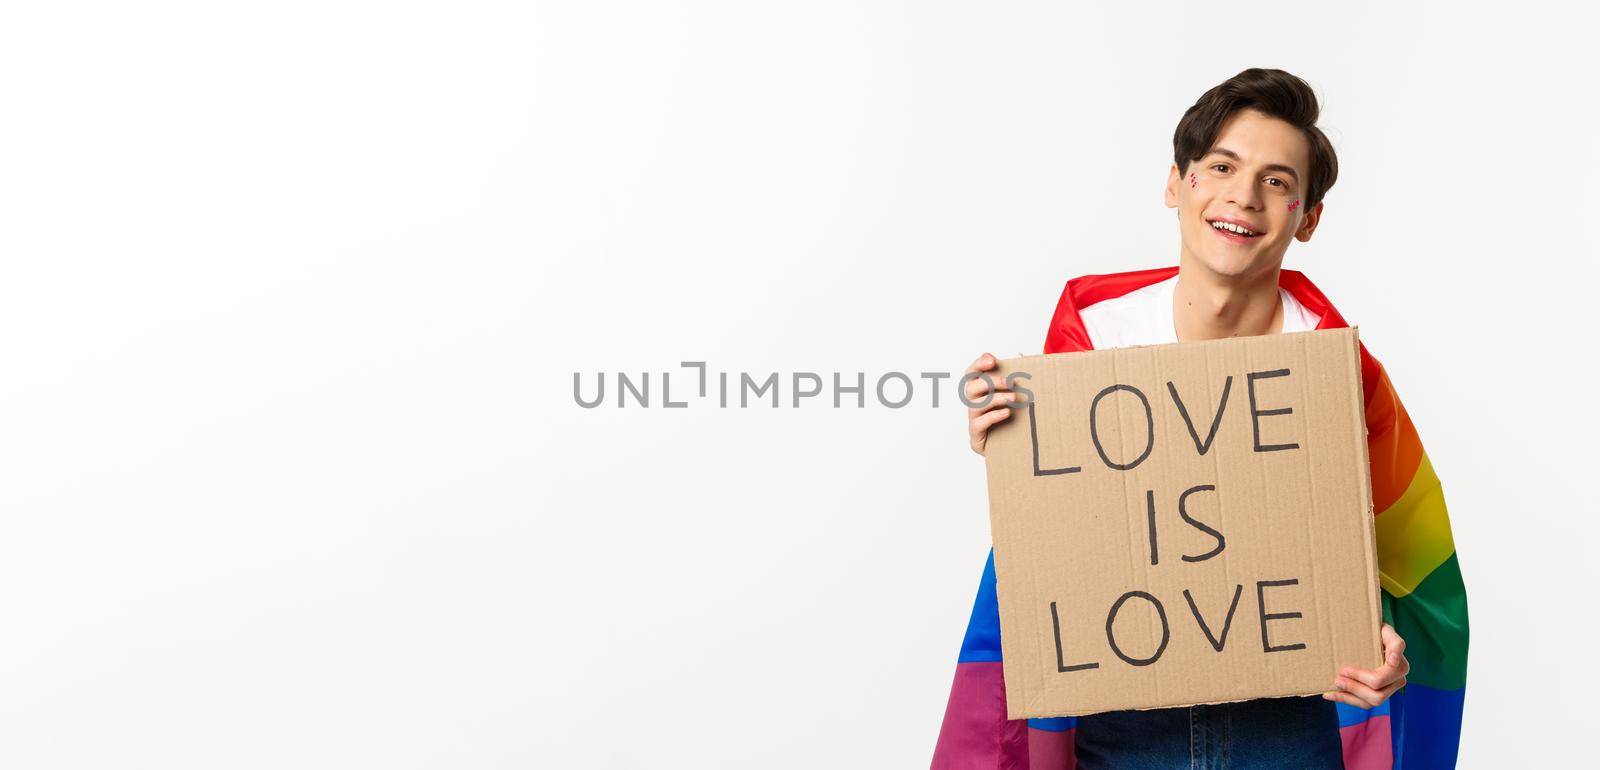 Smiling gay man activist holding sign love is love for lgbt pride parade, wearing Rainbow flag, standing over white background.